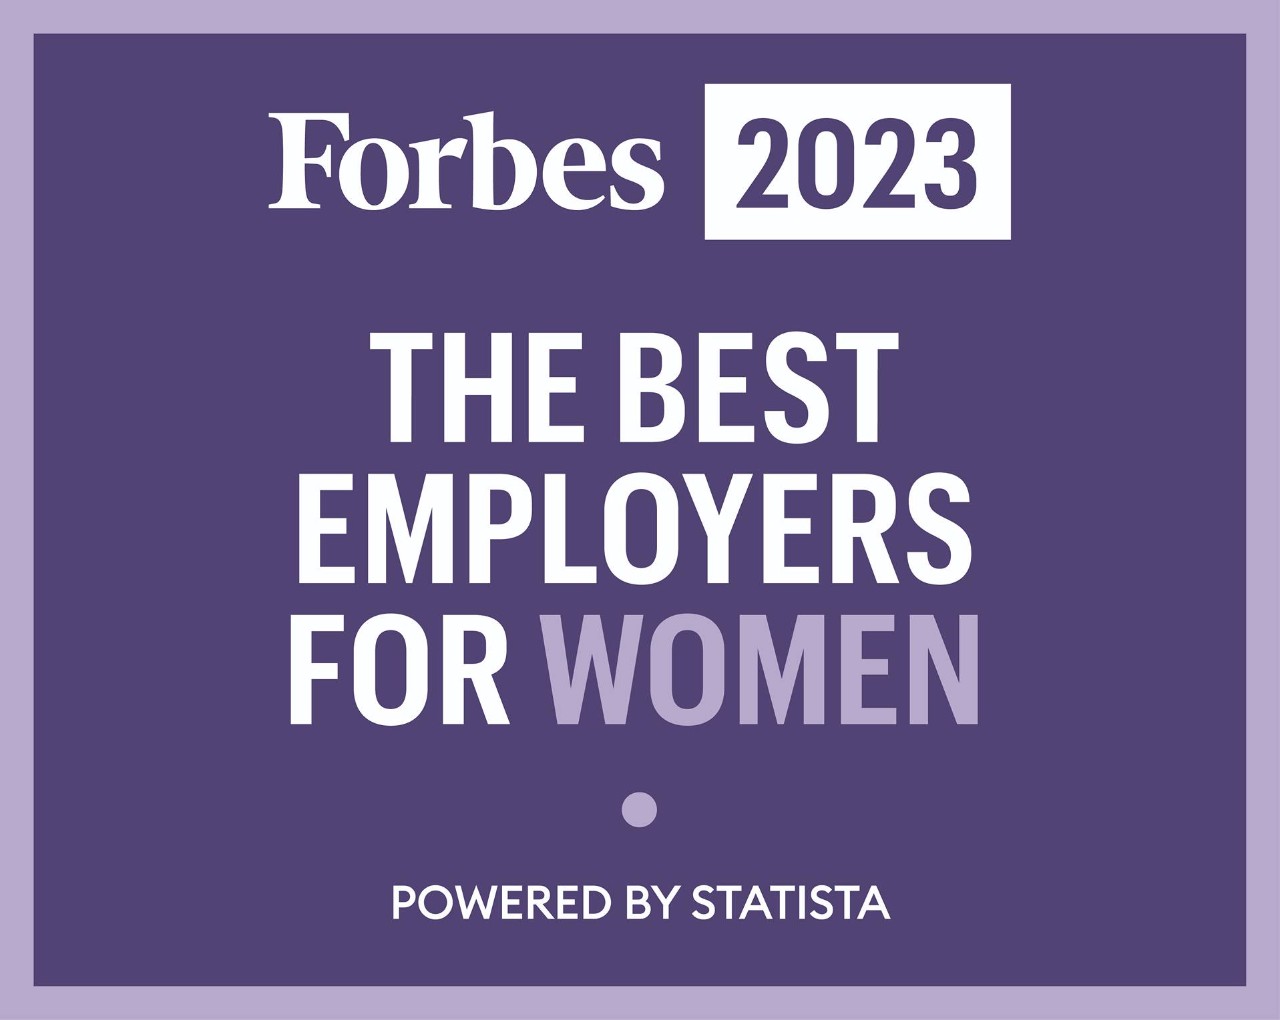 America's best mid-size employers - Forbes 2023